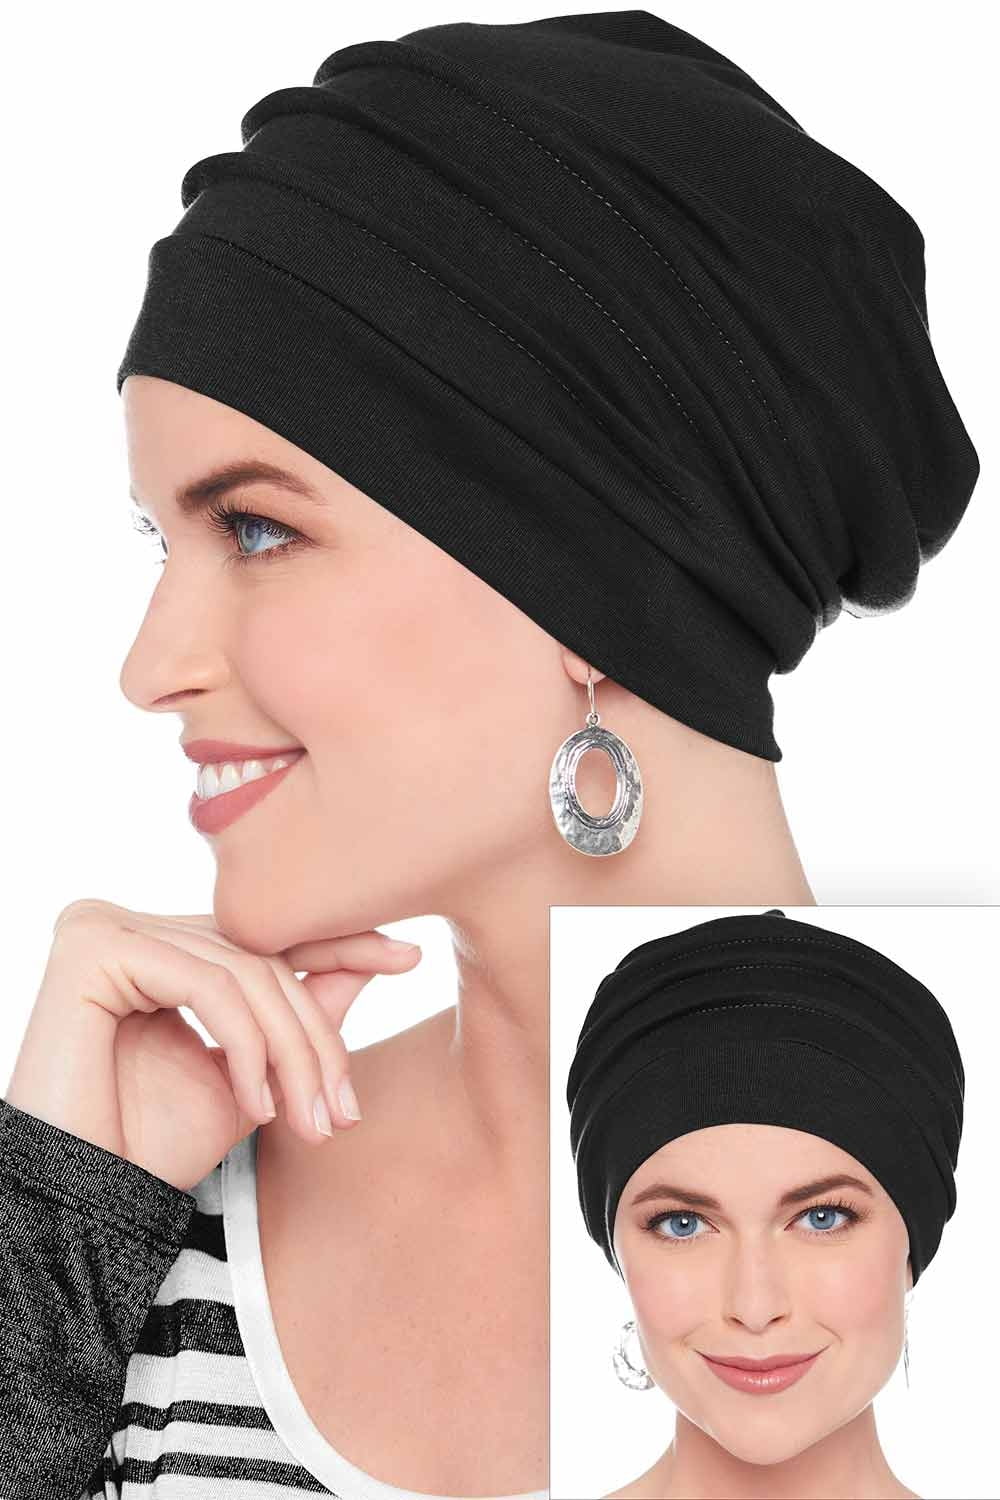 Slouch Beanie Hat Hair Loss Chemo Head Wrap Light Jersey Hat Cotton Skull Cap Unisex Baggy Hip-hop Hat Hijab Bonnet Cap for Men Women Cancer Chemo Alopecia Hair Loss and Sports 